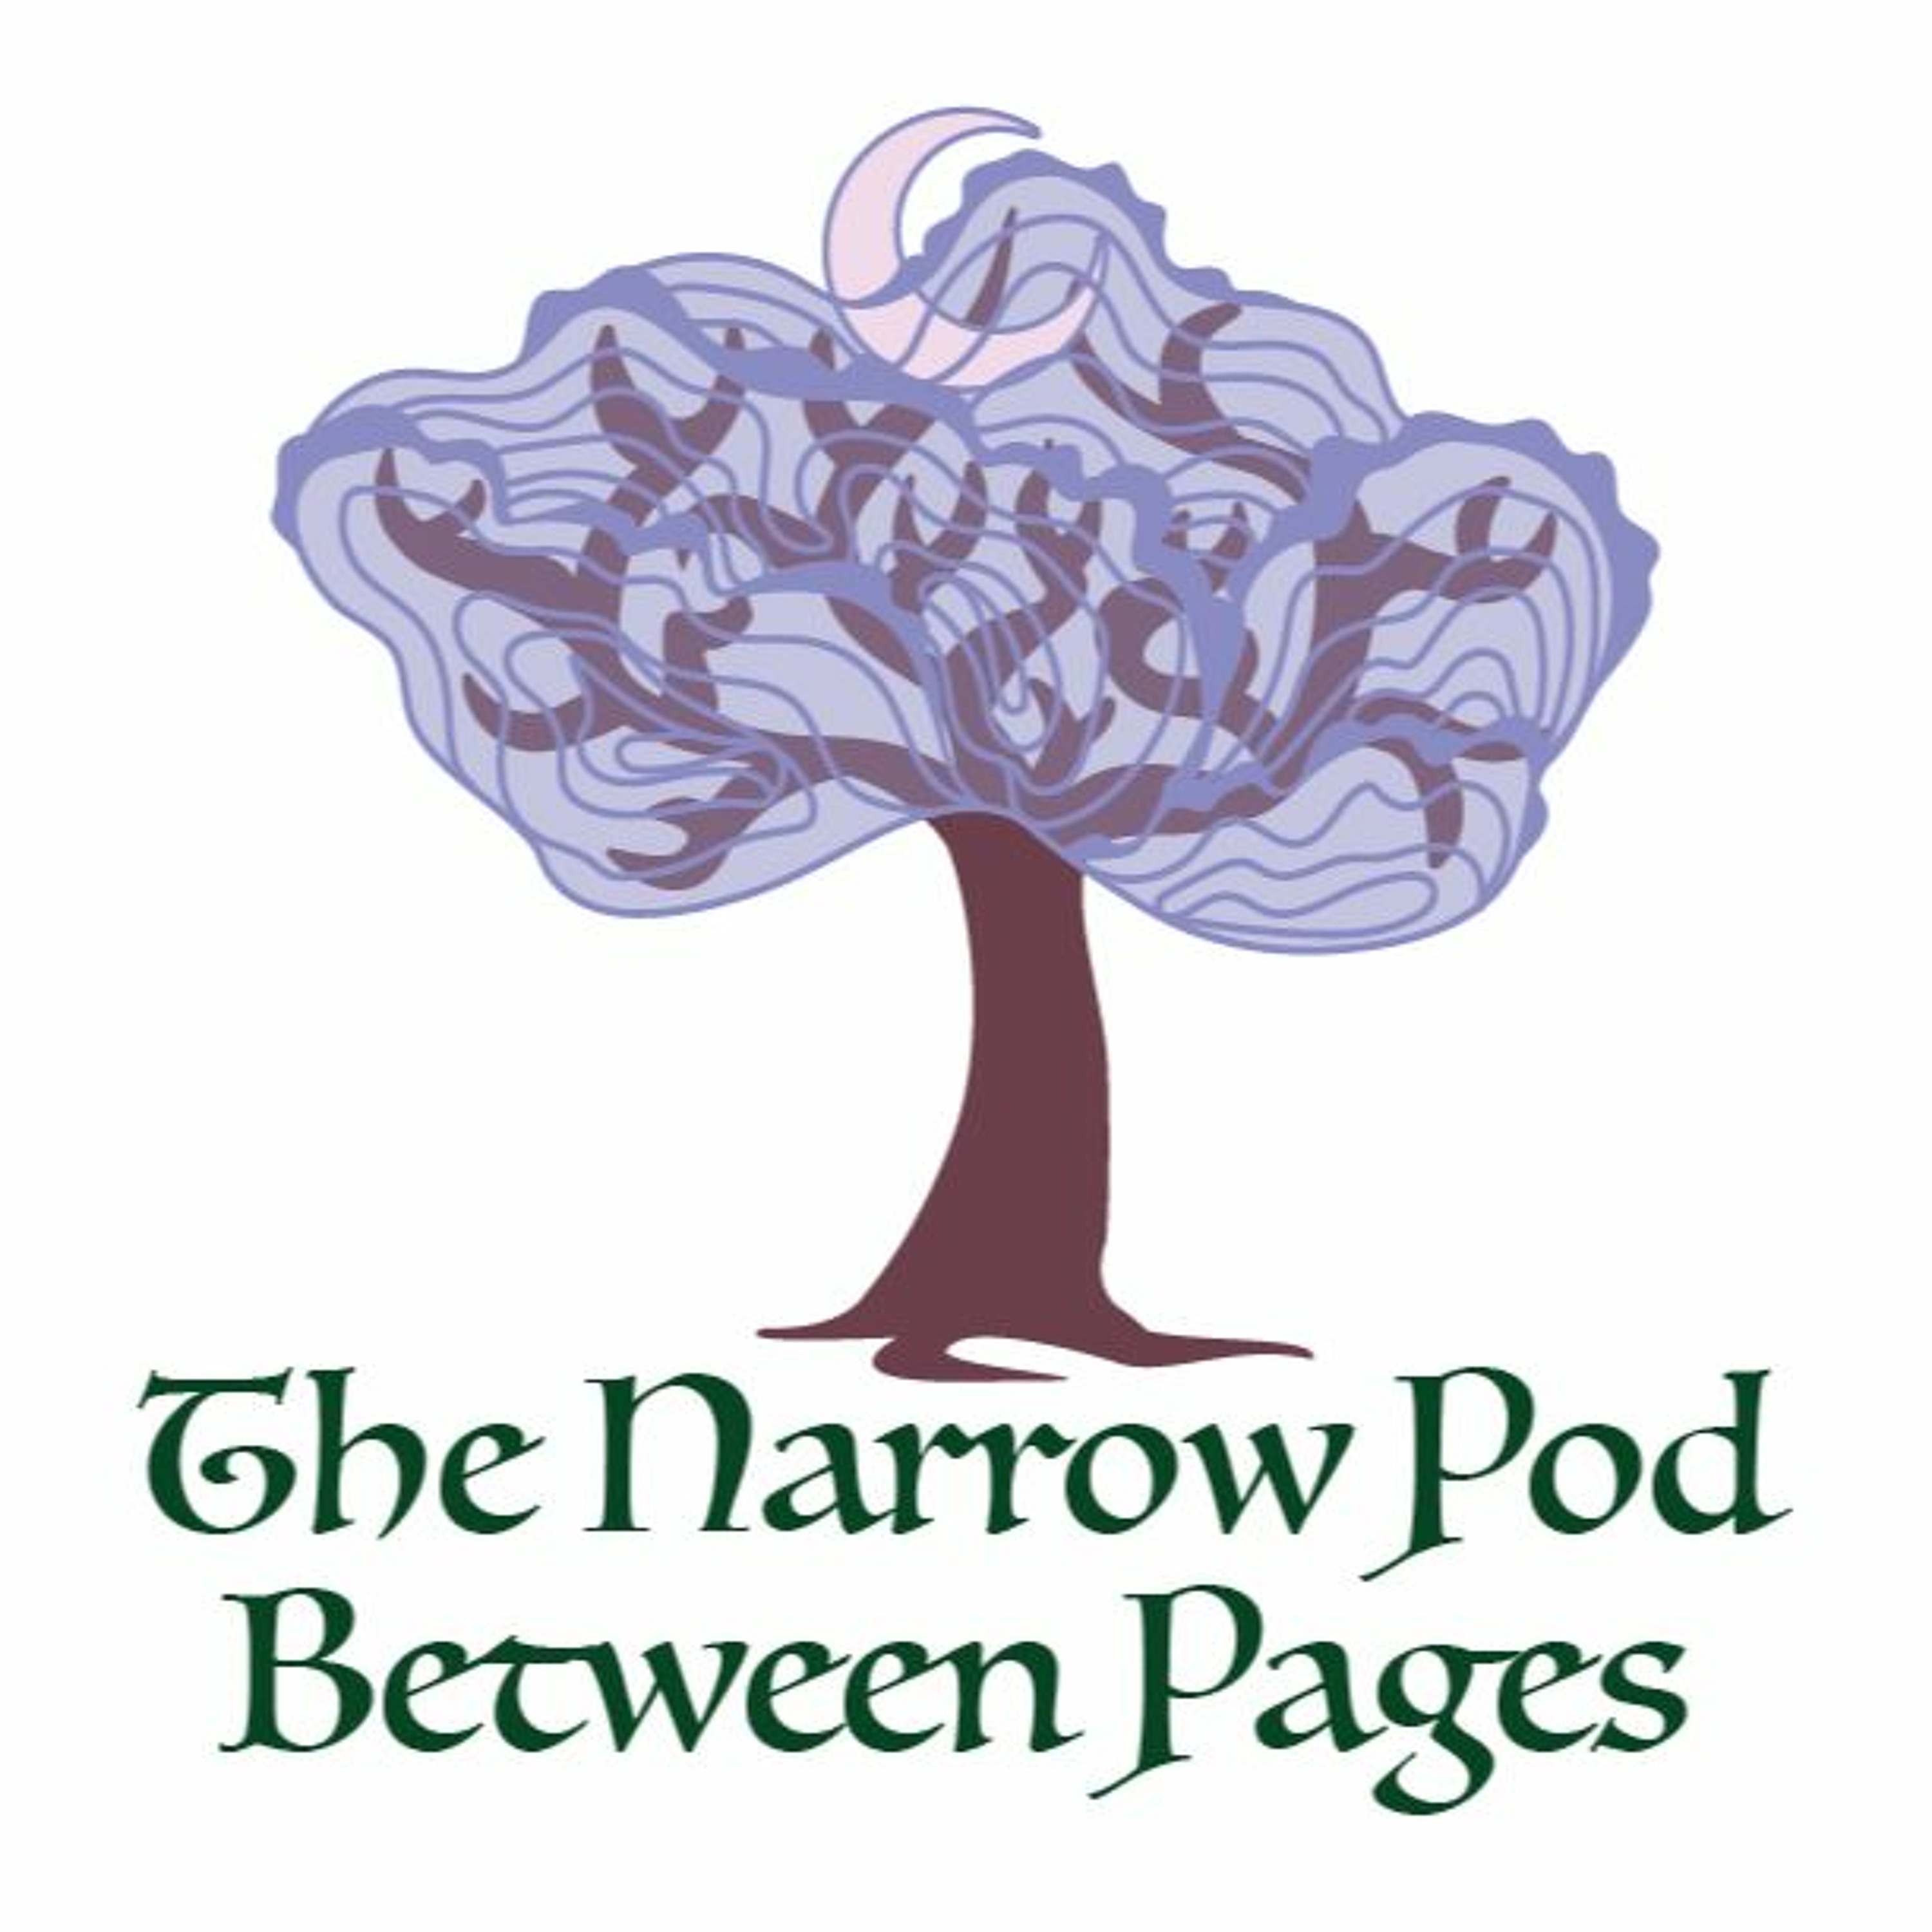 The Narrow Pod Between Pages - Page 185: I’m a reasonable man, get off my case